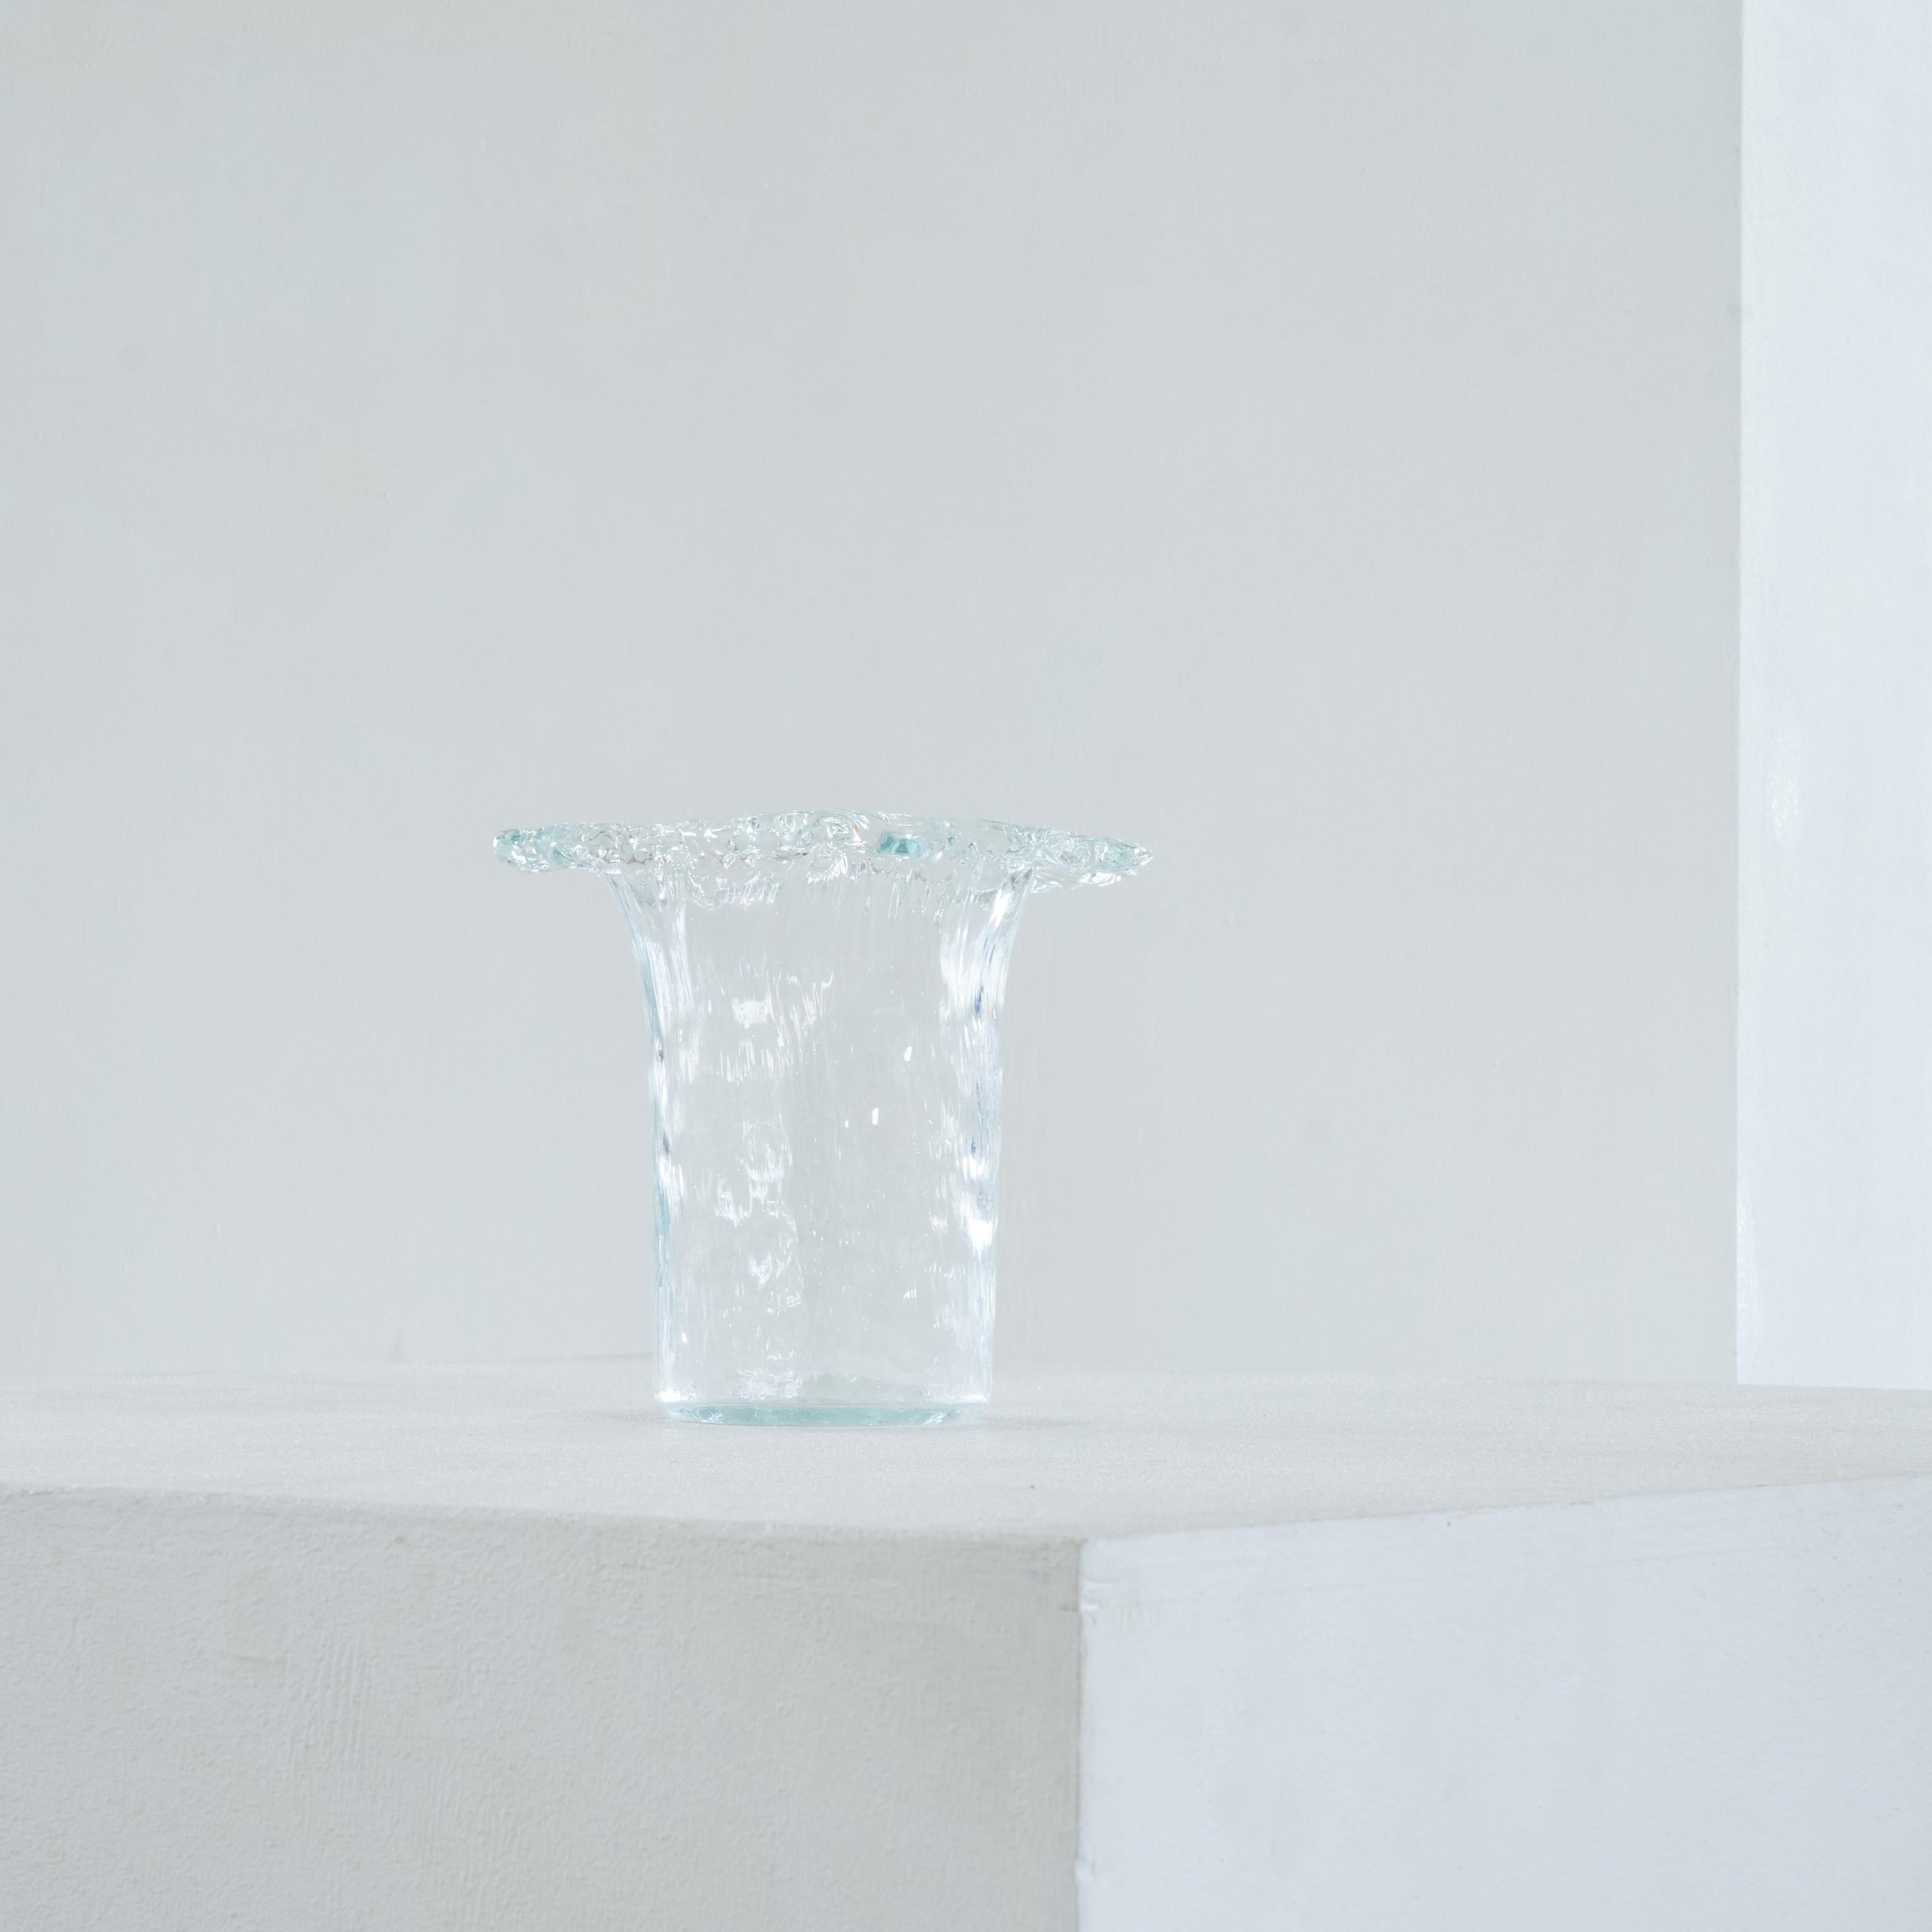 Vase in carved glass 1970s, in the style of Tapio Wirkkala.

Wonderful and elegant vase in carved glass which resembles carved ice. Similar to works by designer Tapio Wirkkala. Stylish, timeless and very good in quality and execution. The slightly